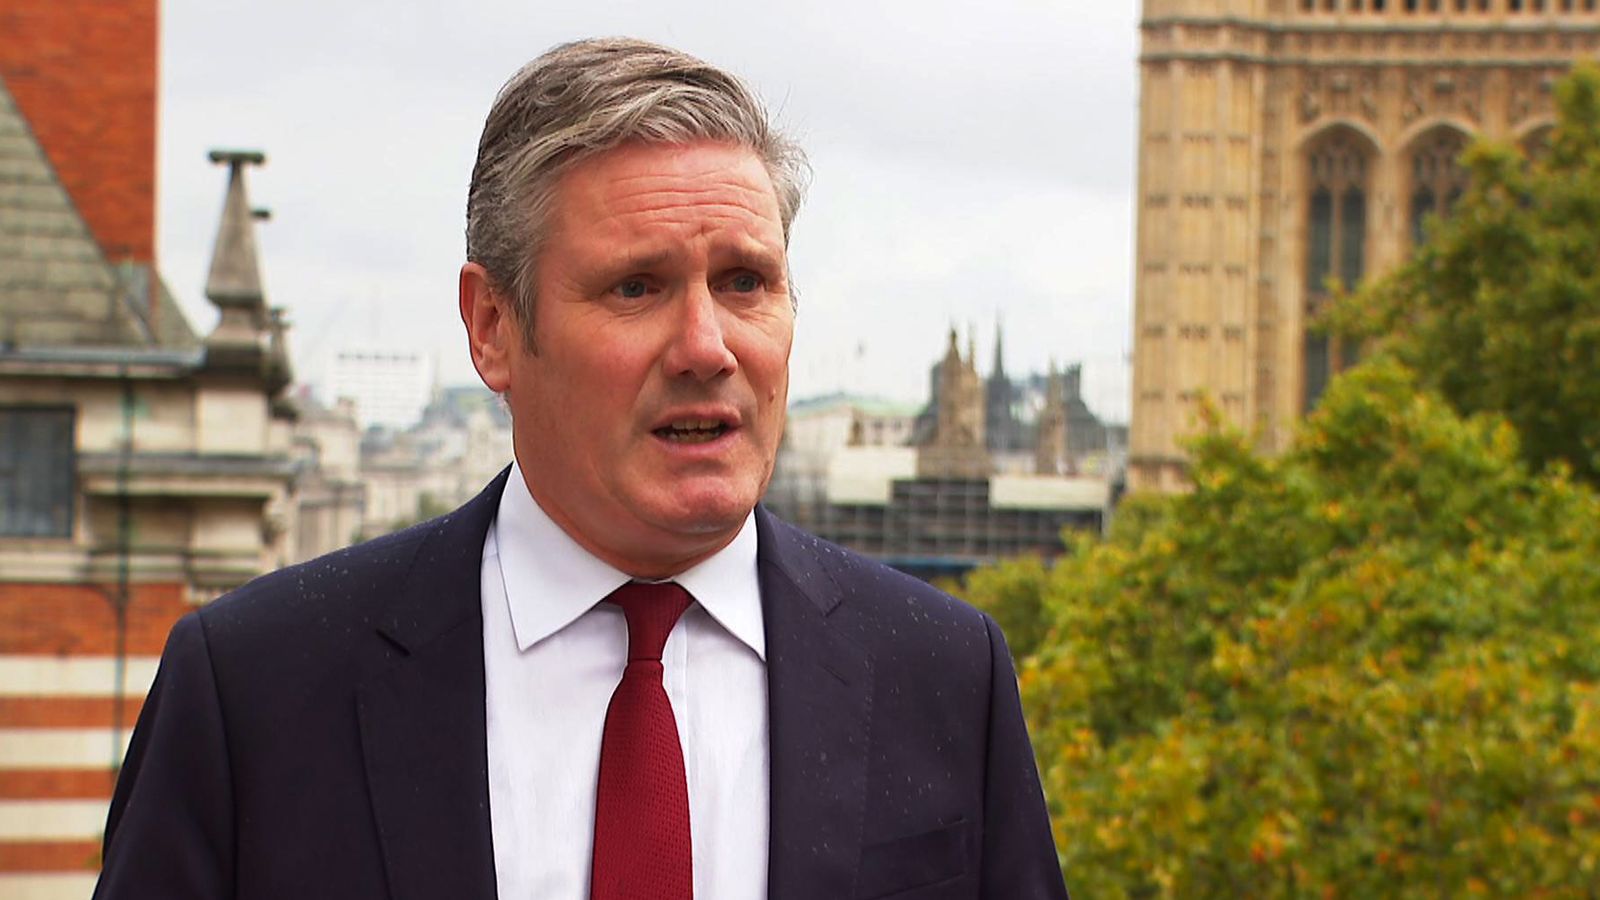 Sir Keir Starmer calls for general election as politicians react to Liz Truss's resignation